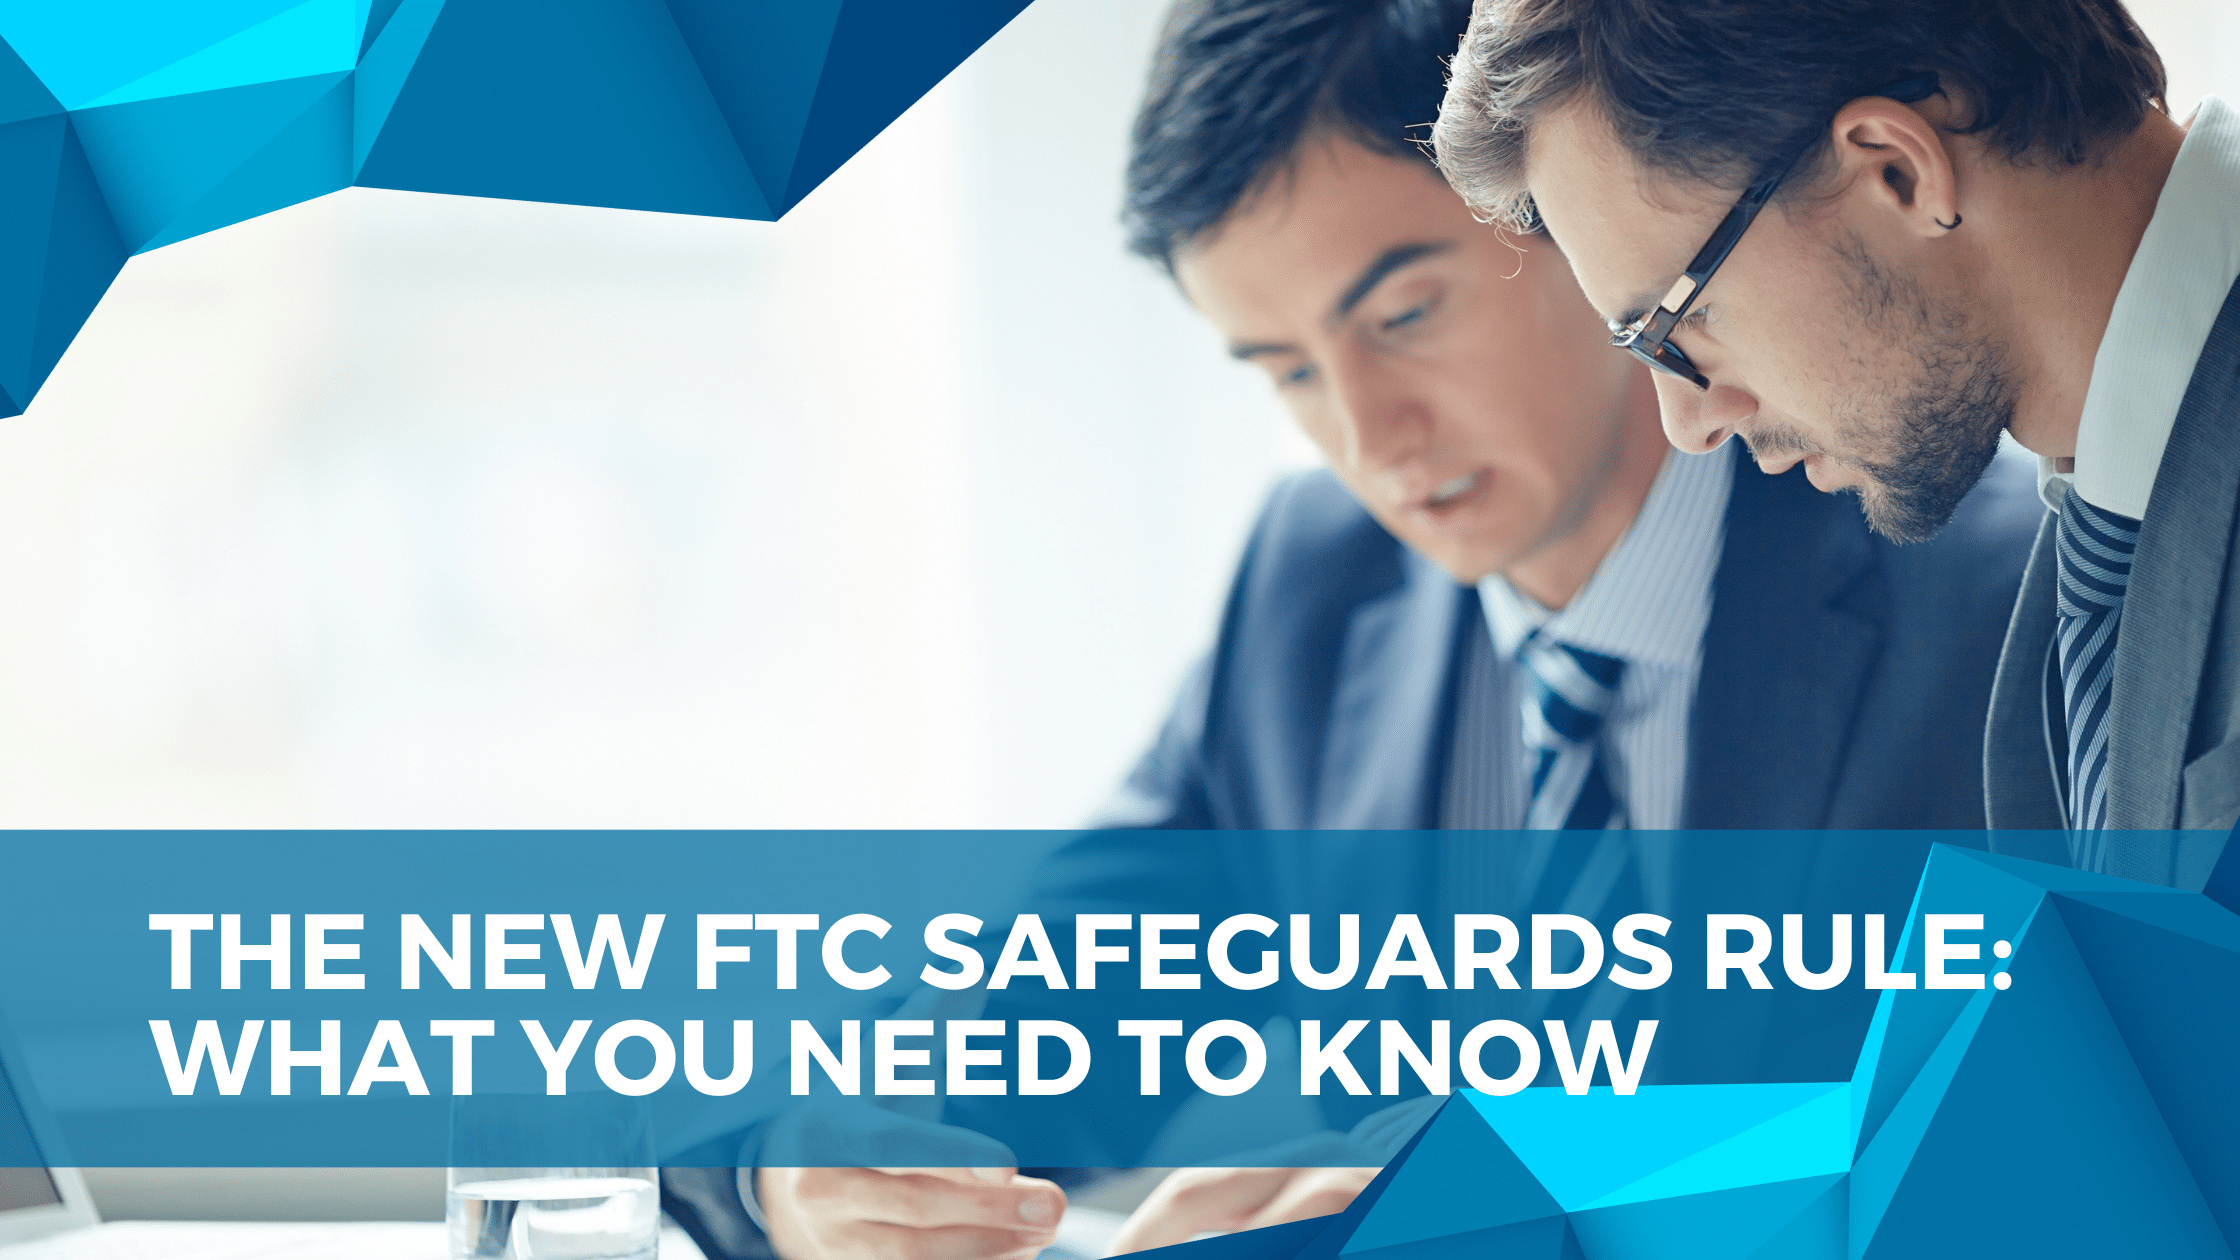 The New FTC Safeguards Rule – What You Need to Know